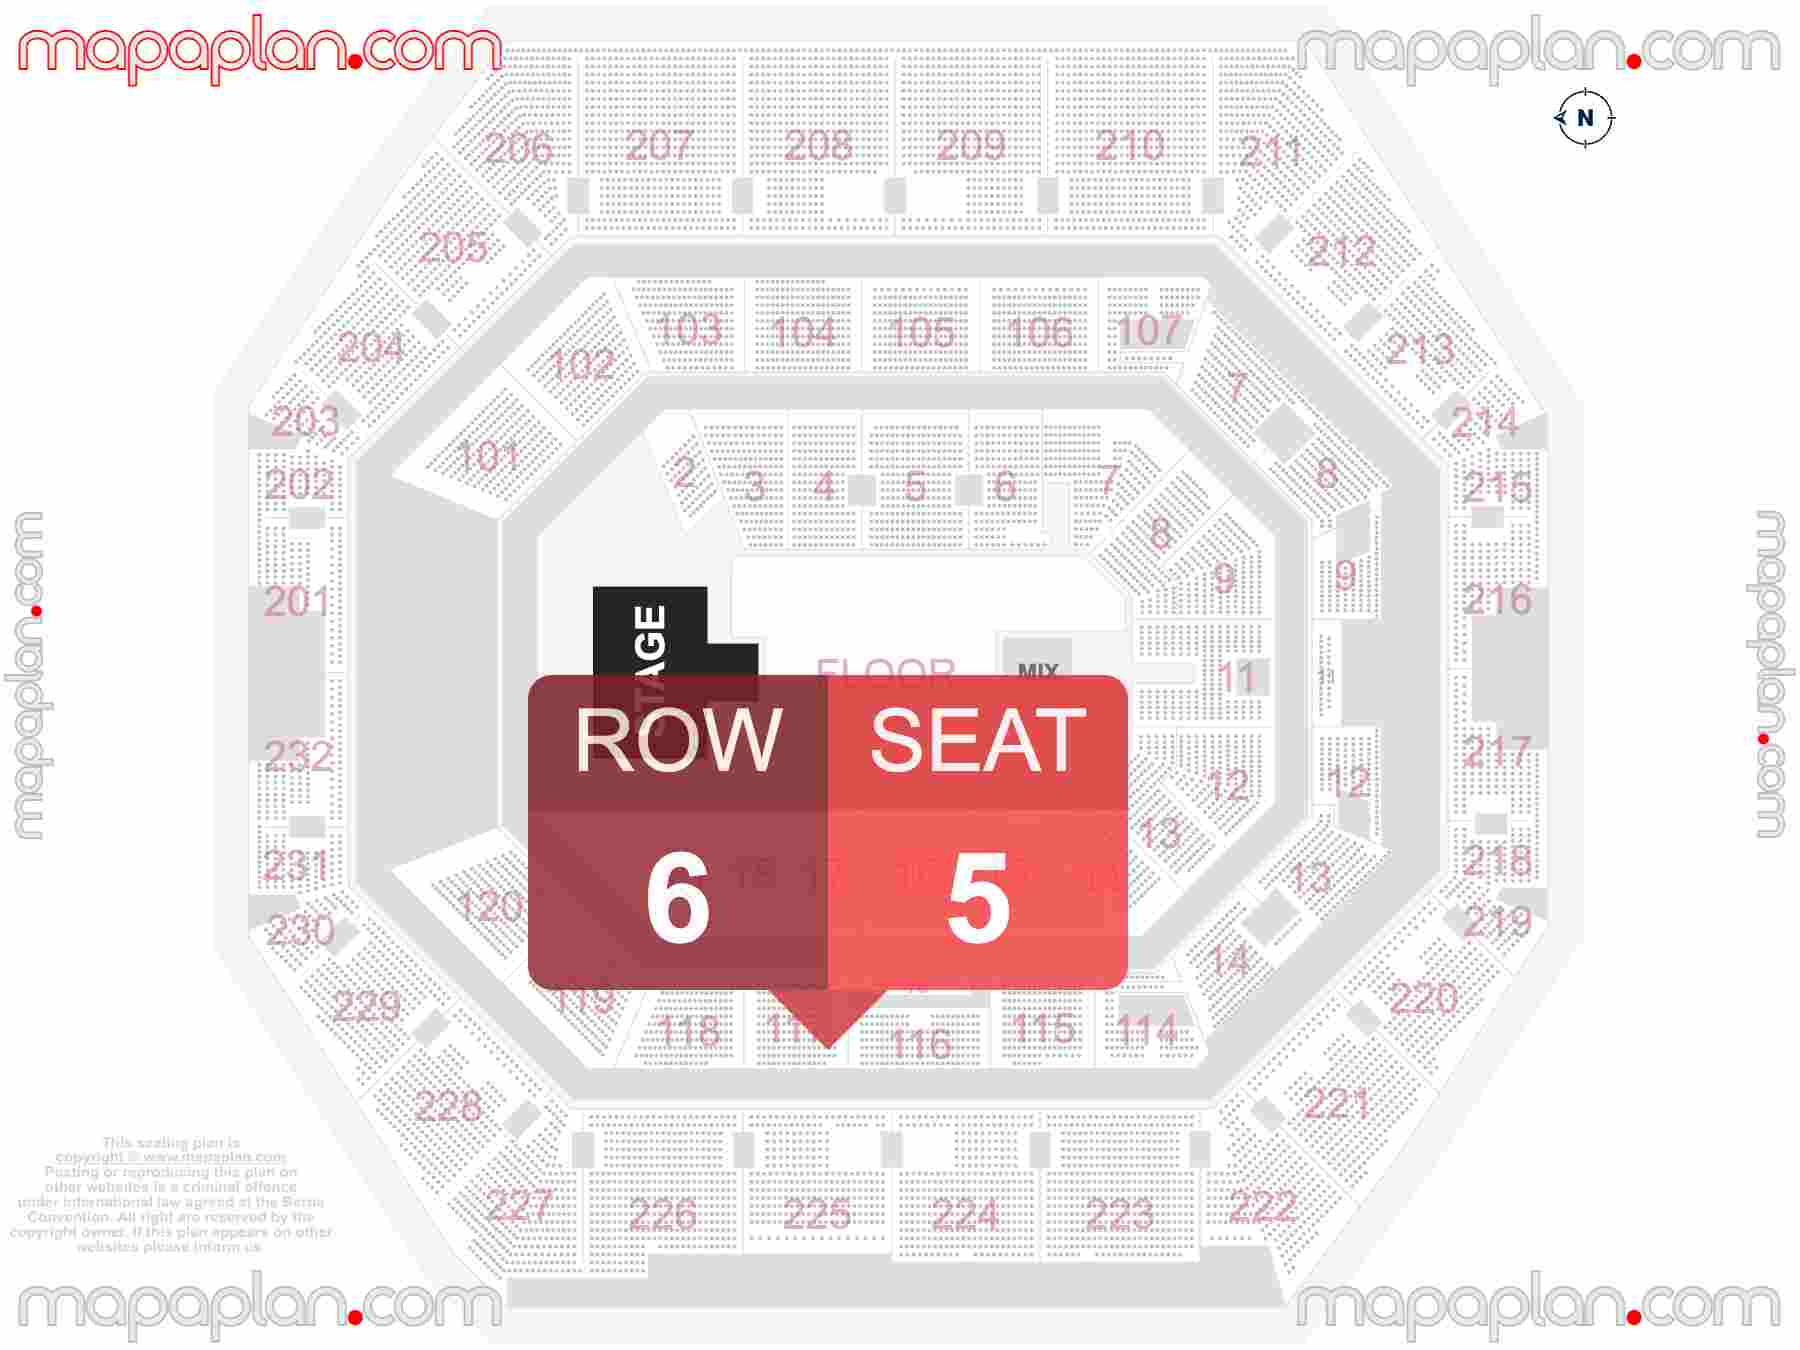 Indianapolis Gainbridge Fieldhouse seating chart Concert with floor general admission standing interactive seating checker map plan showing seat numbers per row - Ticket prices sections review diagram